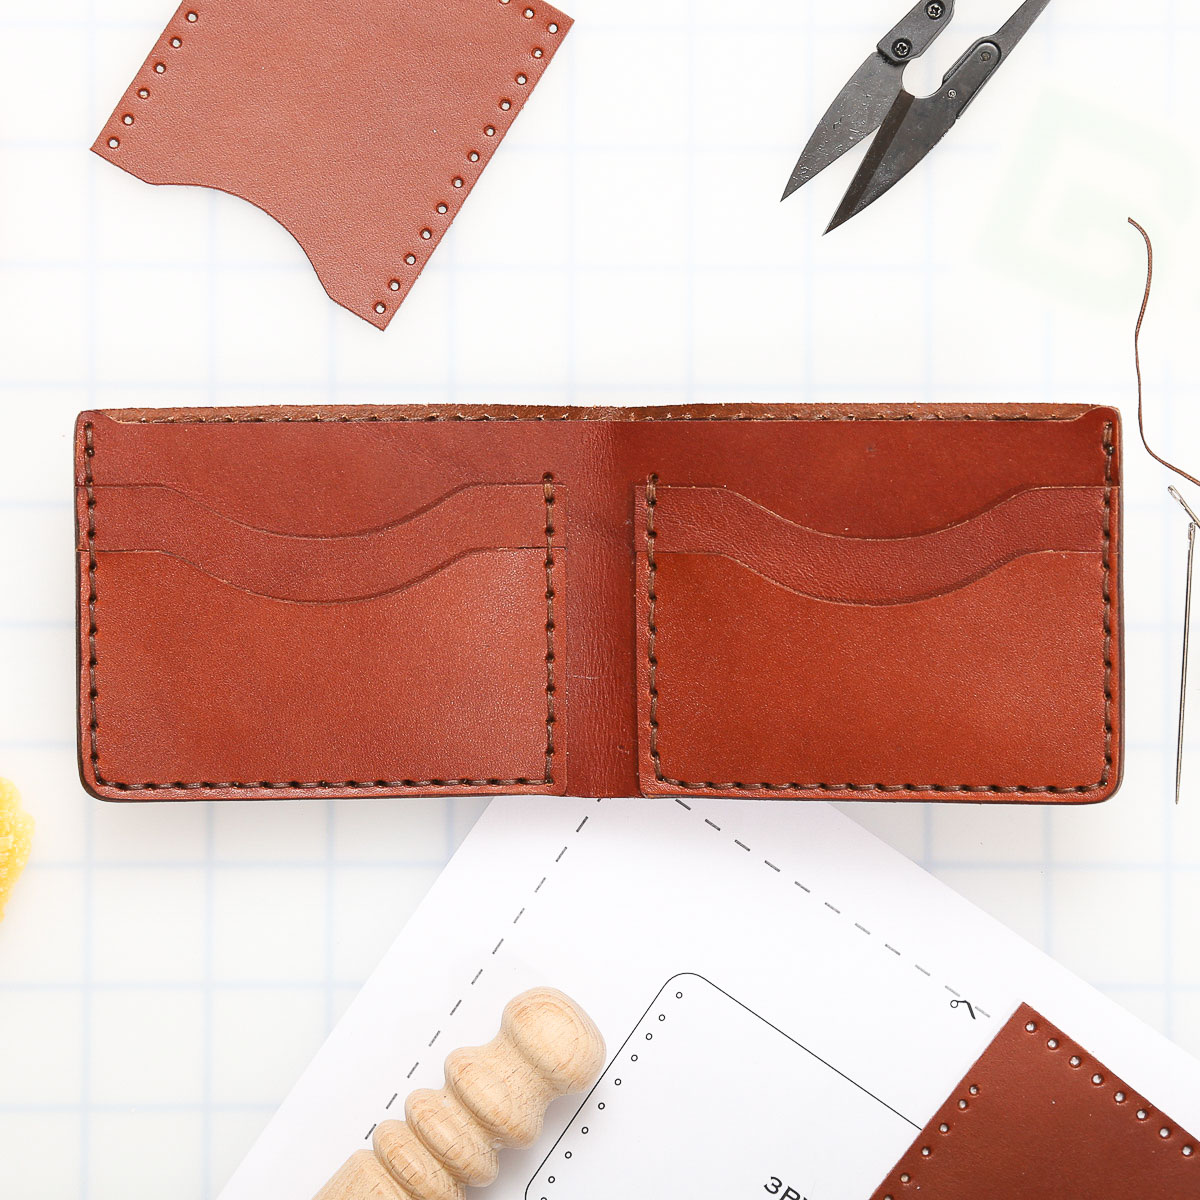 Leather Wallet Making Kit - Make Your Own Leather Billfold Wallet Kit - DIY  Leather Accessory - DIY Vintage Unisex Bifold Leather Making Kits for